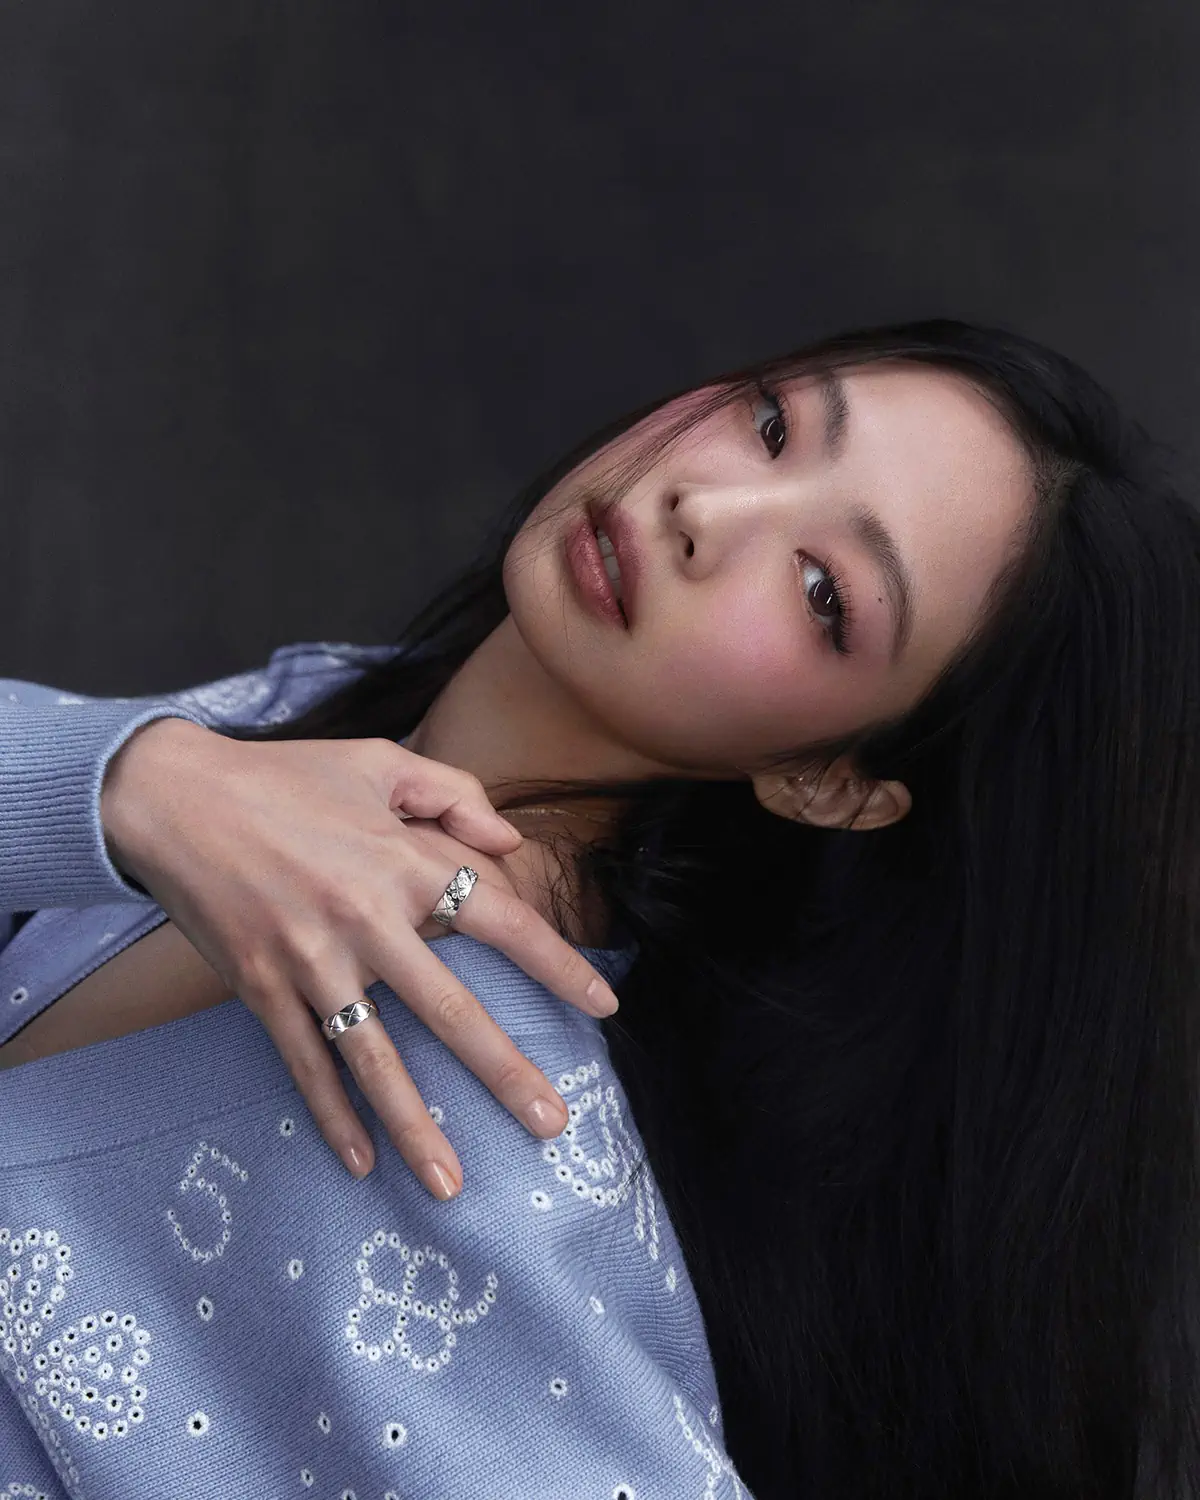 Blackpink’s Jennie in Chanel on Vogue Taiwan March 2023 by Kim Hee June